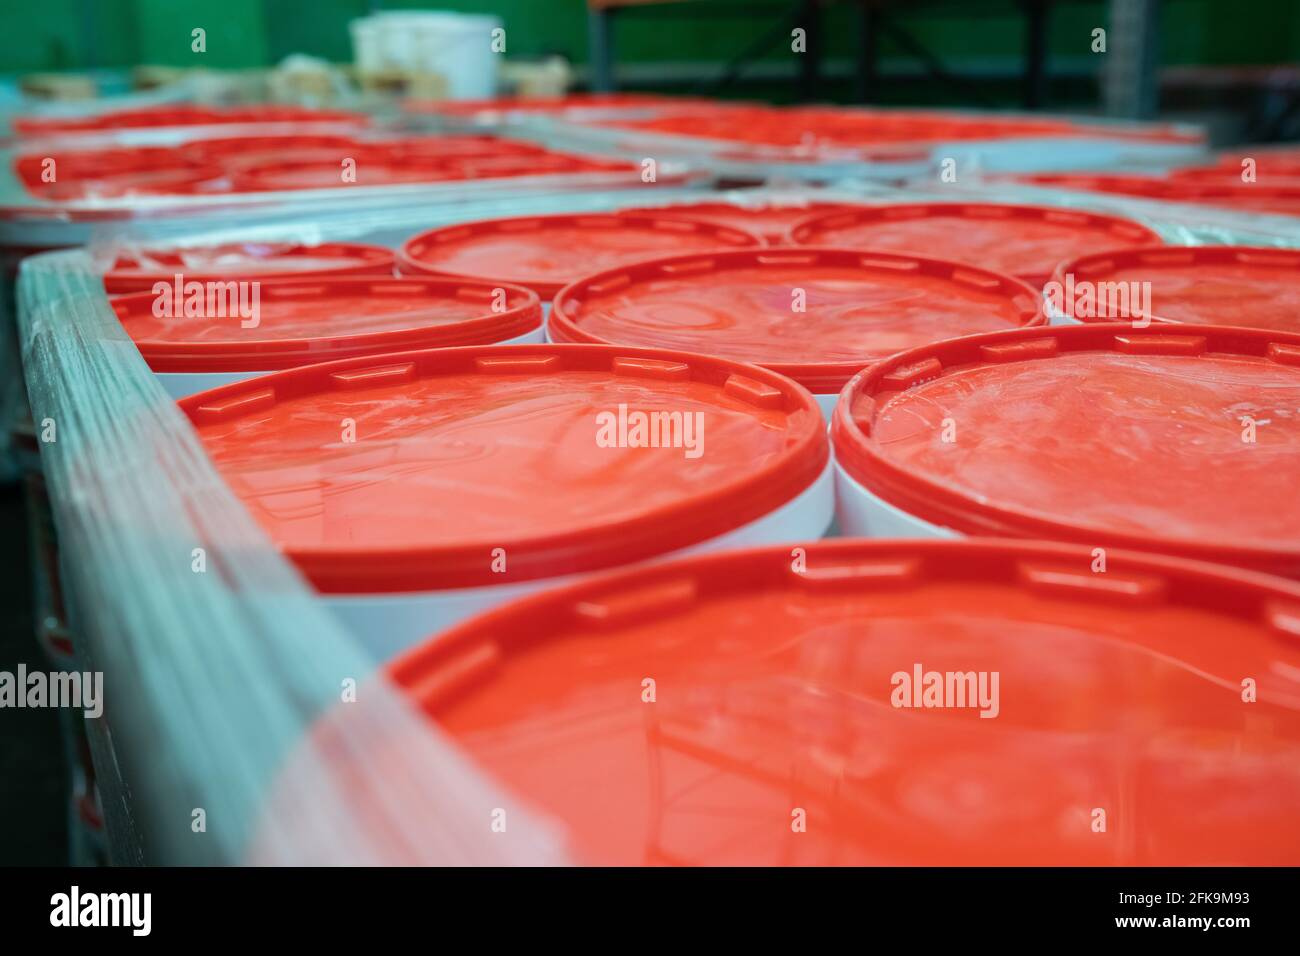 Close-up of paint containers with red covers wrapped together into stretch film at warehouse Stock Photo